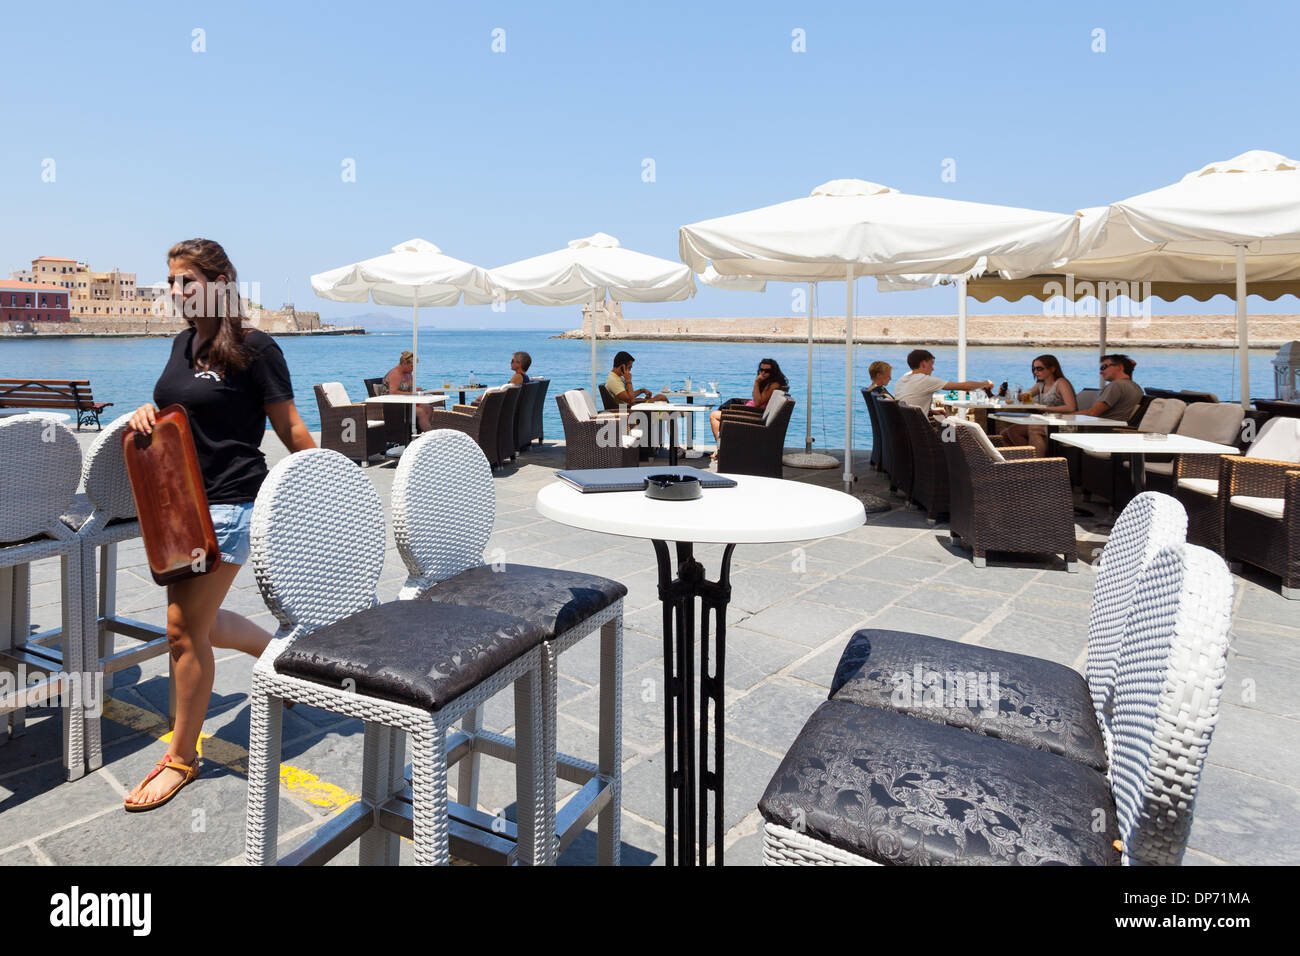 People enjoying in a restaurant cafe pub at the ancient Venetian harbor of Chania, Crete Island, Greece Stock Photo